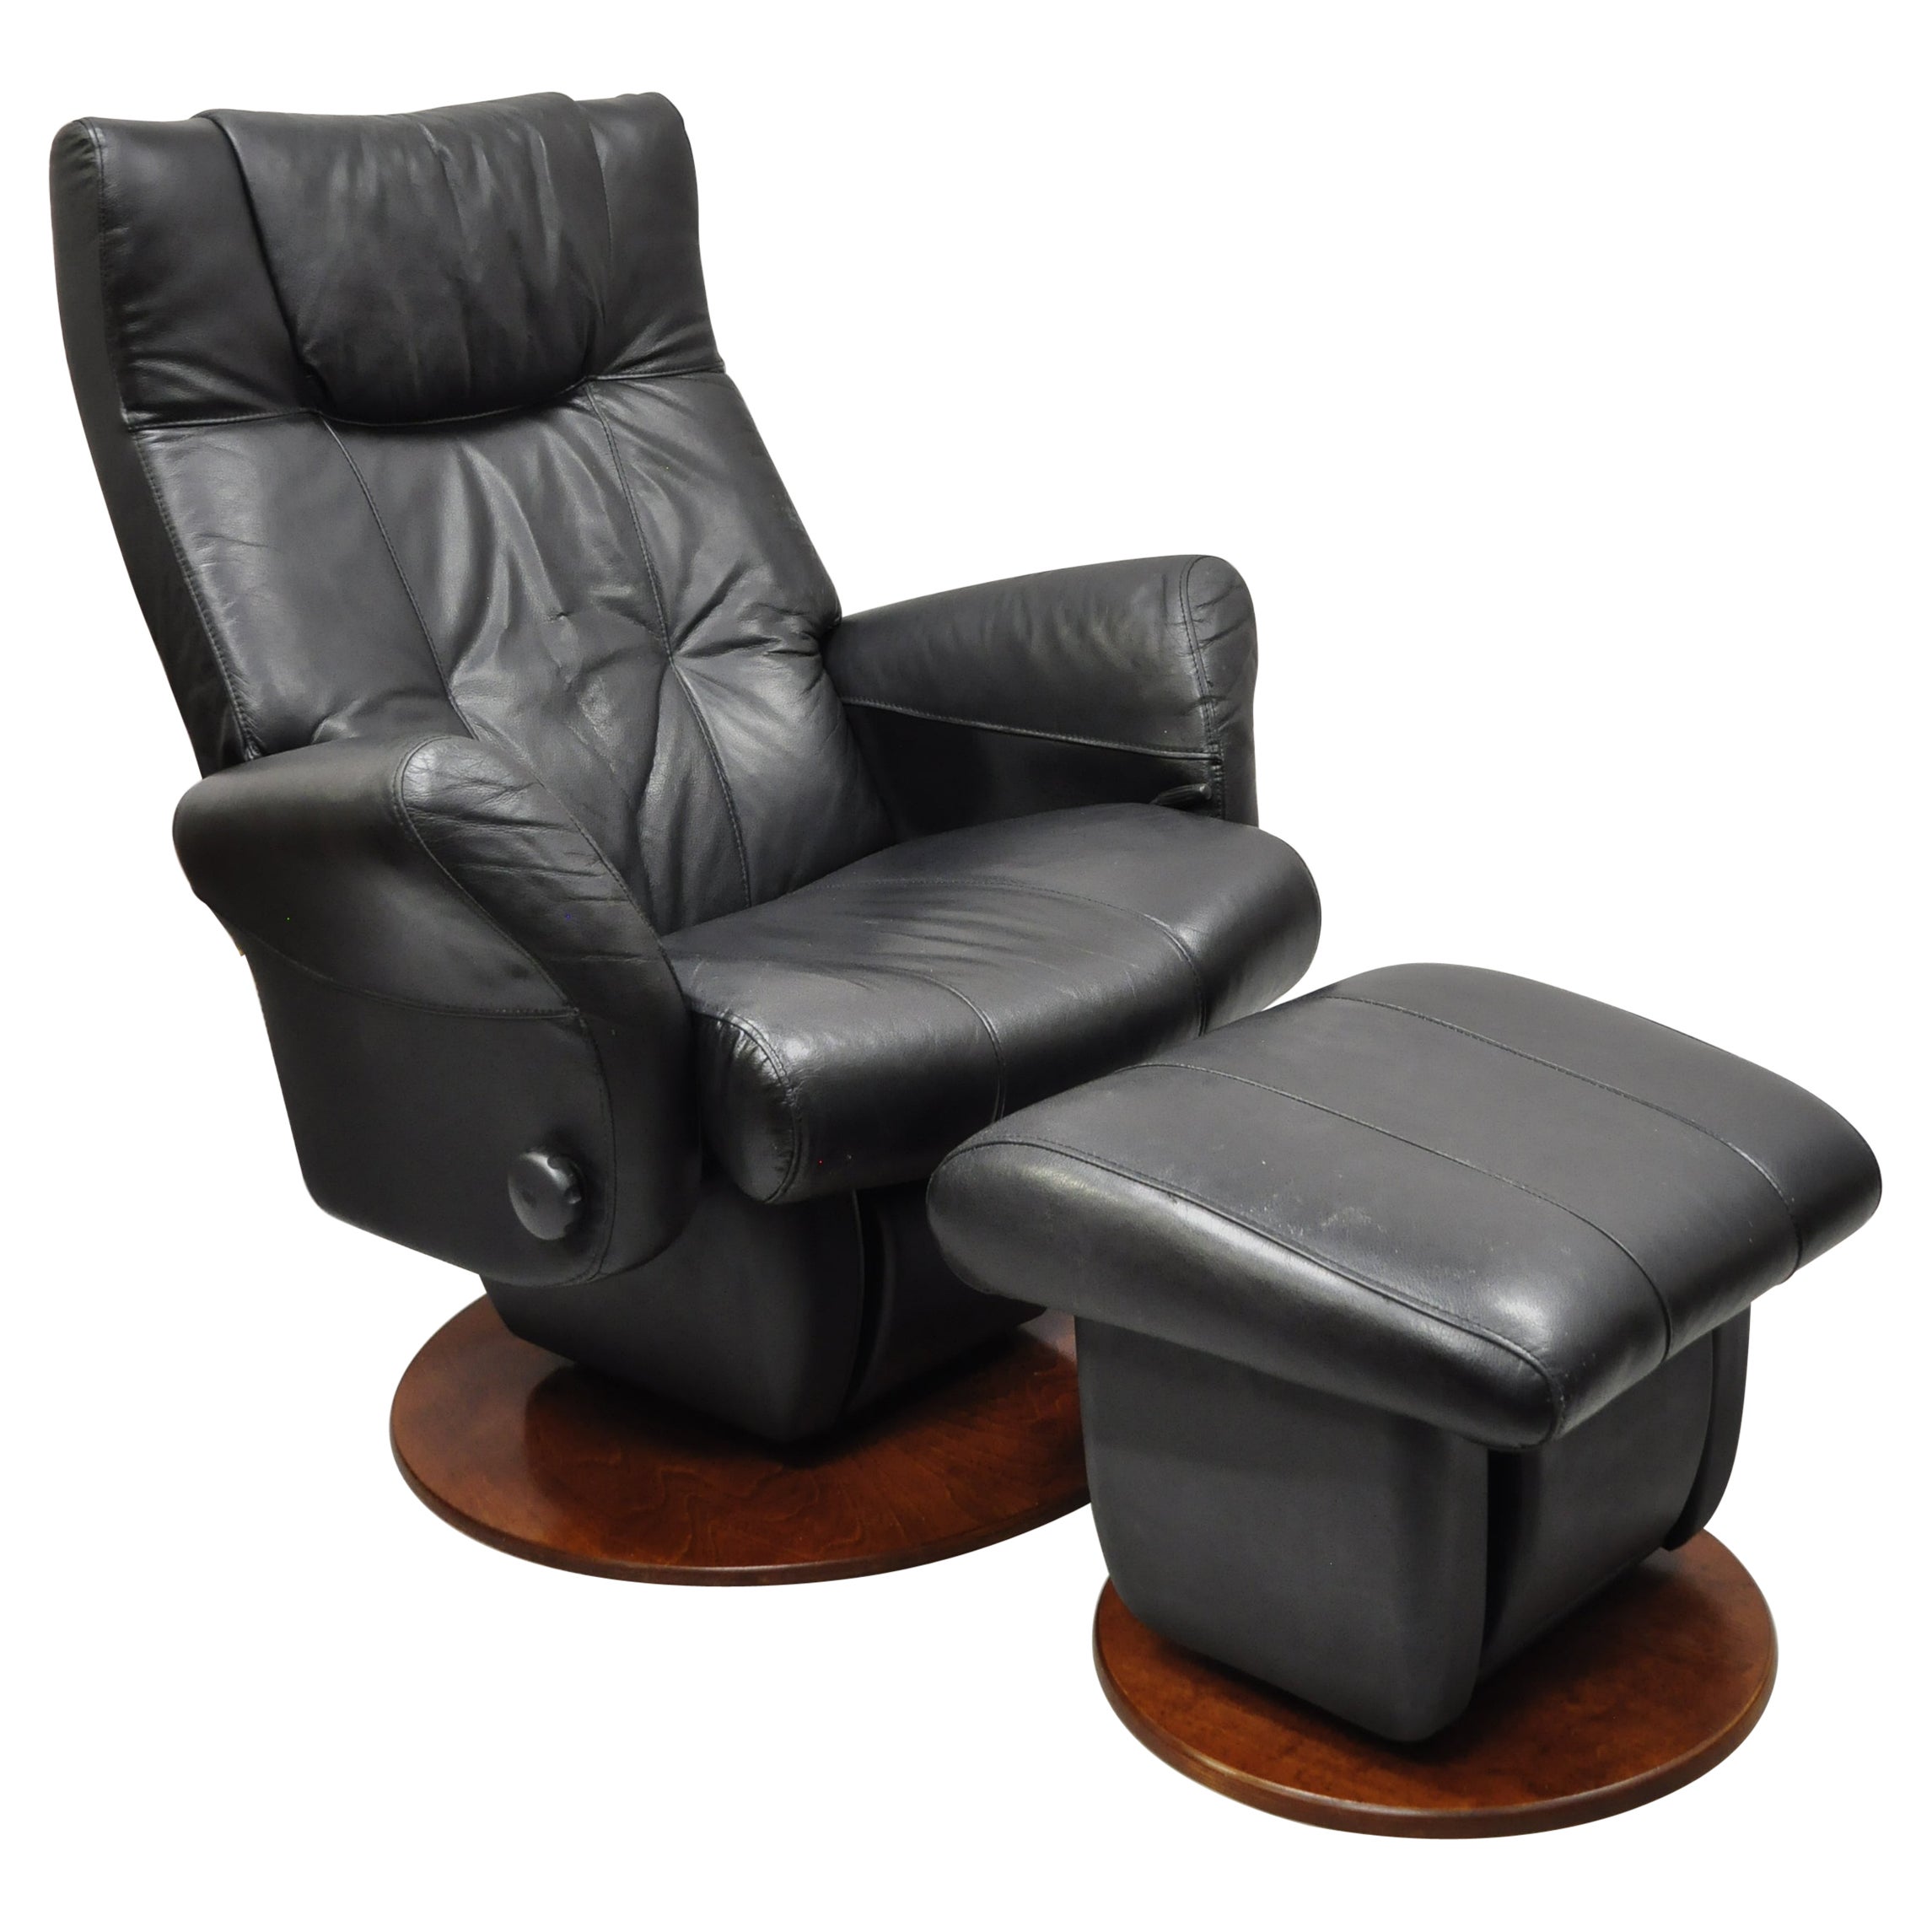 Dutailier Black Leather Avant Glide Glider Swivel Recliner Chair and Ottoman